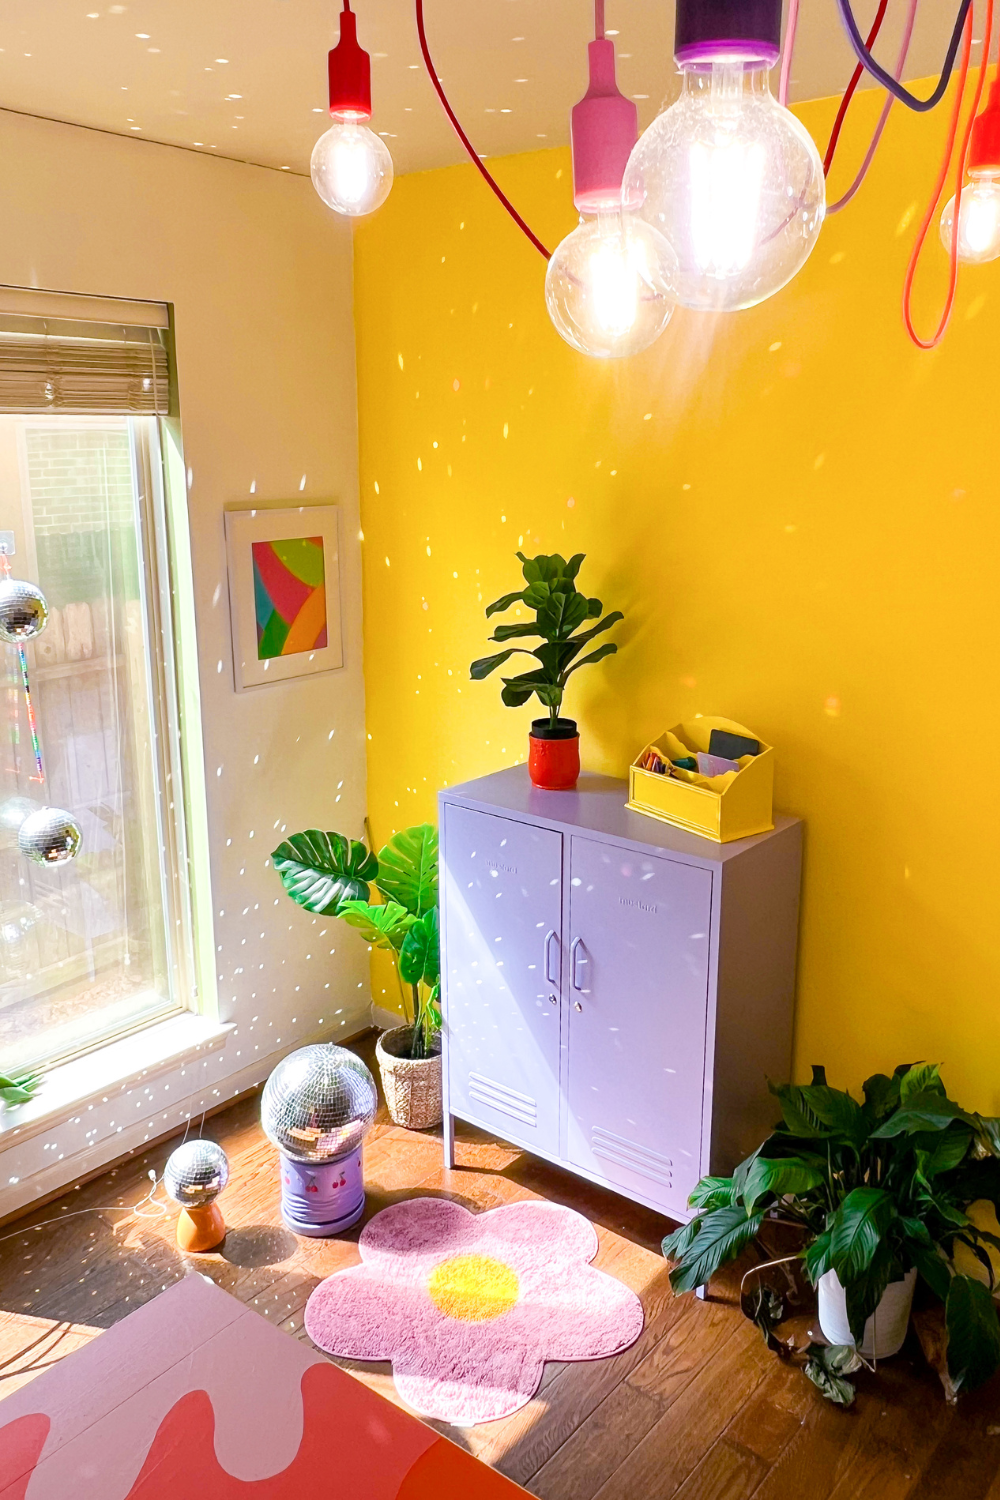 A Lilac Midi sits against a yellow wall, with light flecks reflecting off a disco ball. The room is filled with plants and brightly coloured decor pieces.